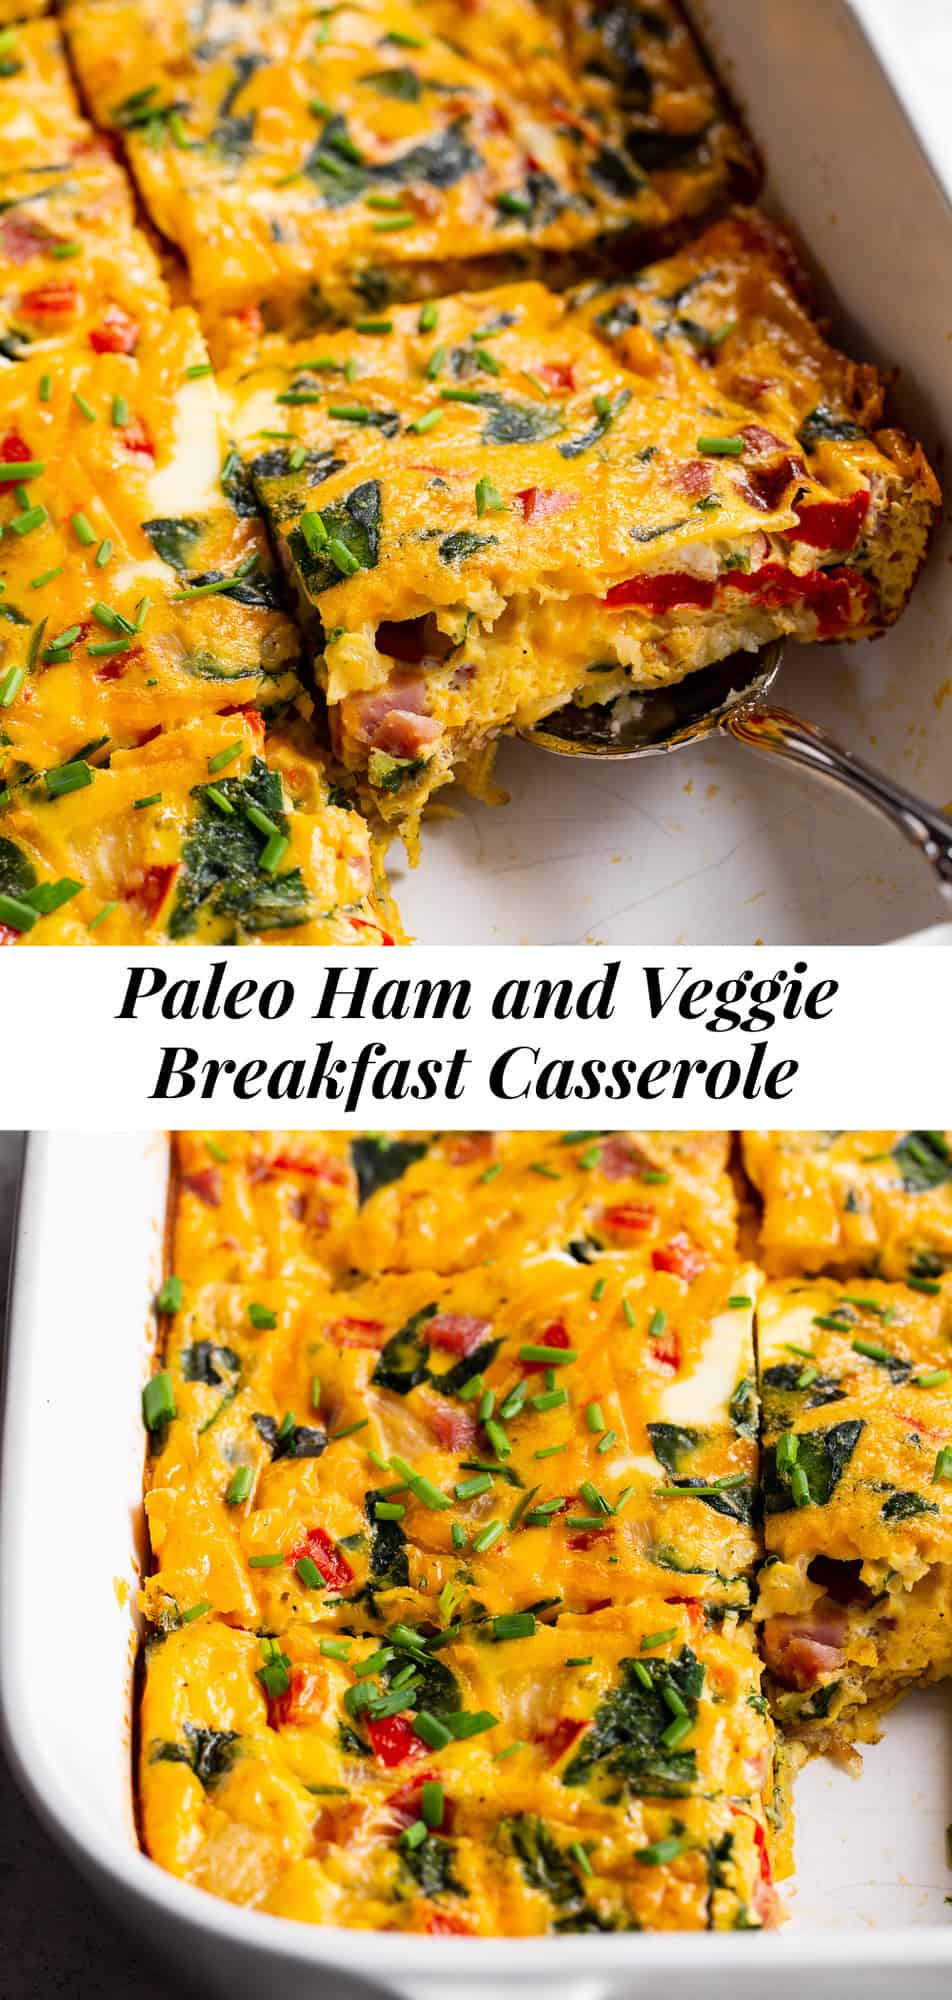 This ham and veggie breakfast casserole is a savory breakfast dream! Packed with protein and veggies, it’s easy to throw together and great to prep ahead of time. Paleo, grain free and dairy free with a Whole30 option, family approved and awesome as breakfast for dinner! #paleo #whole30 #cleaneating